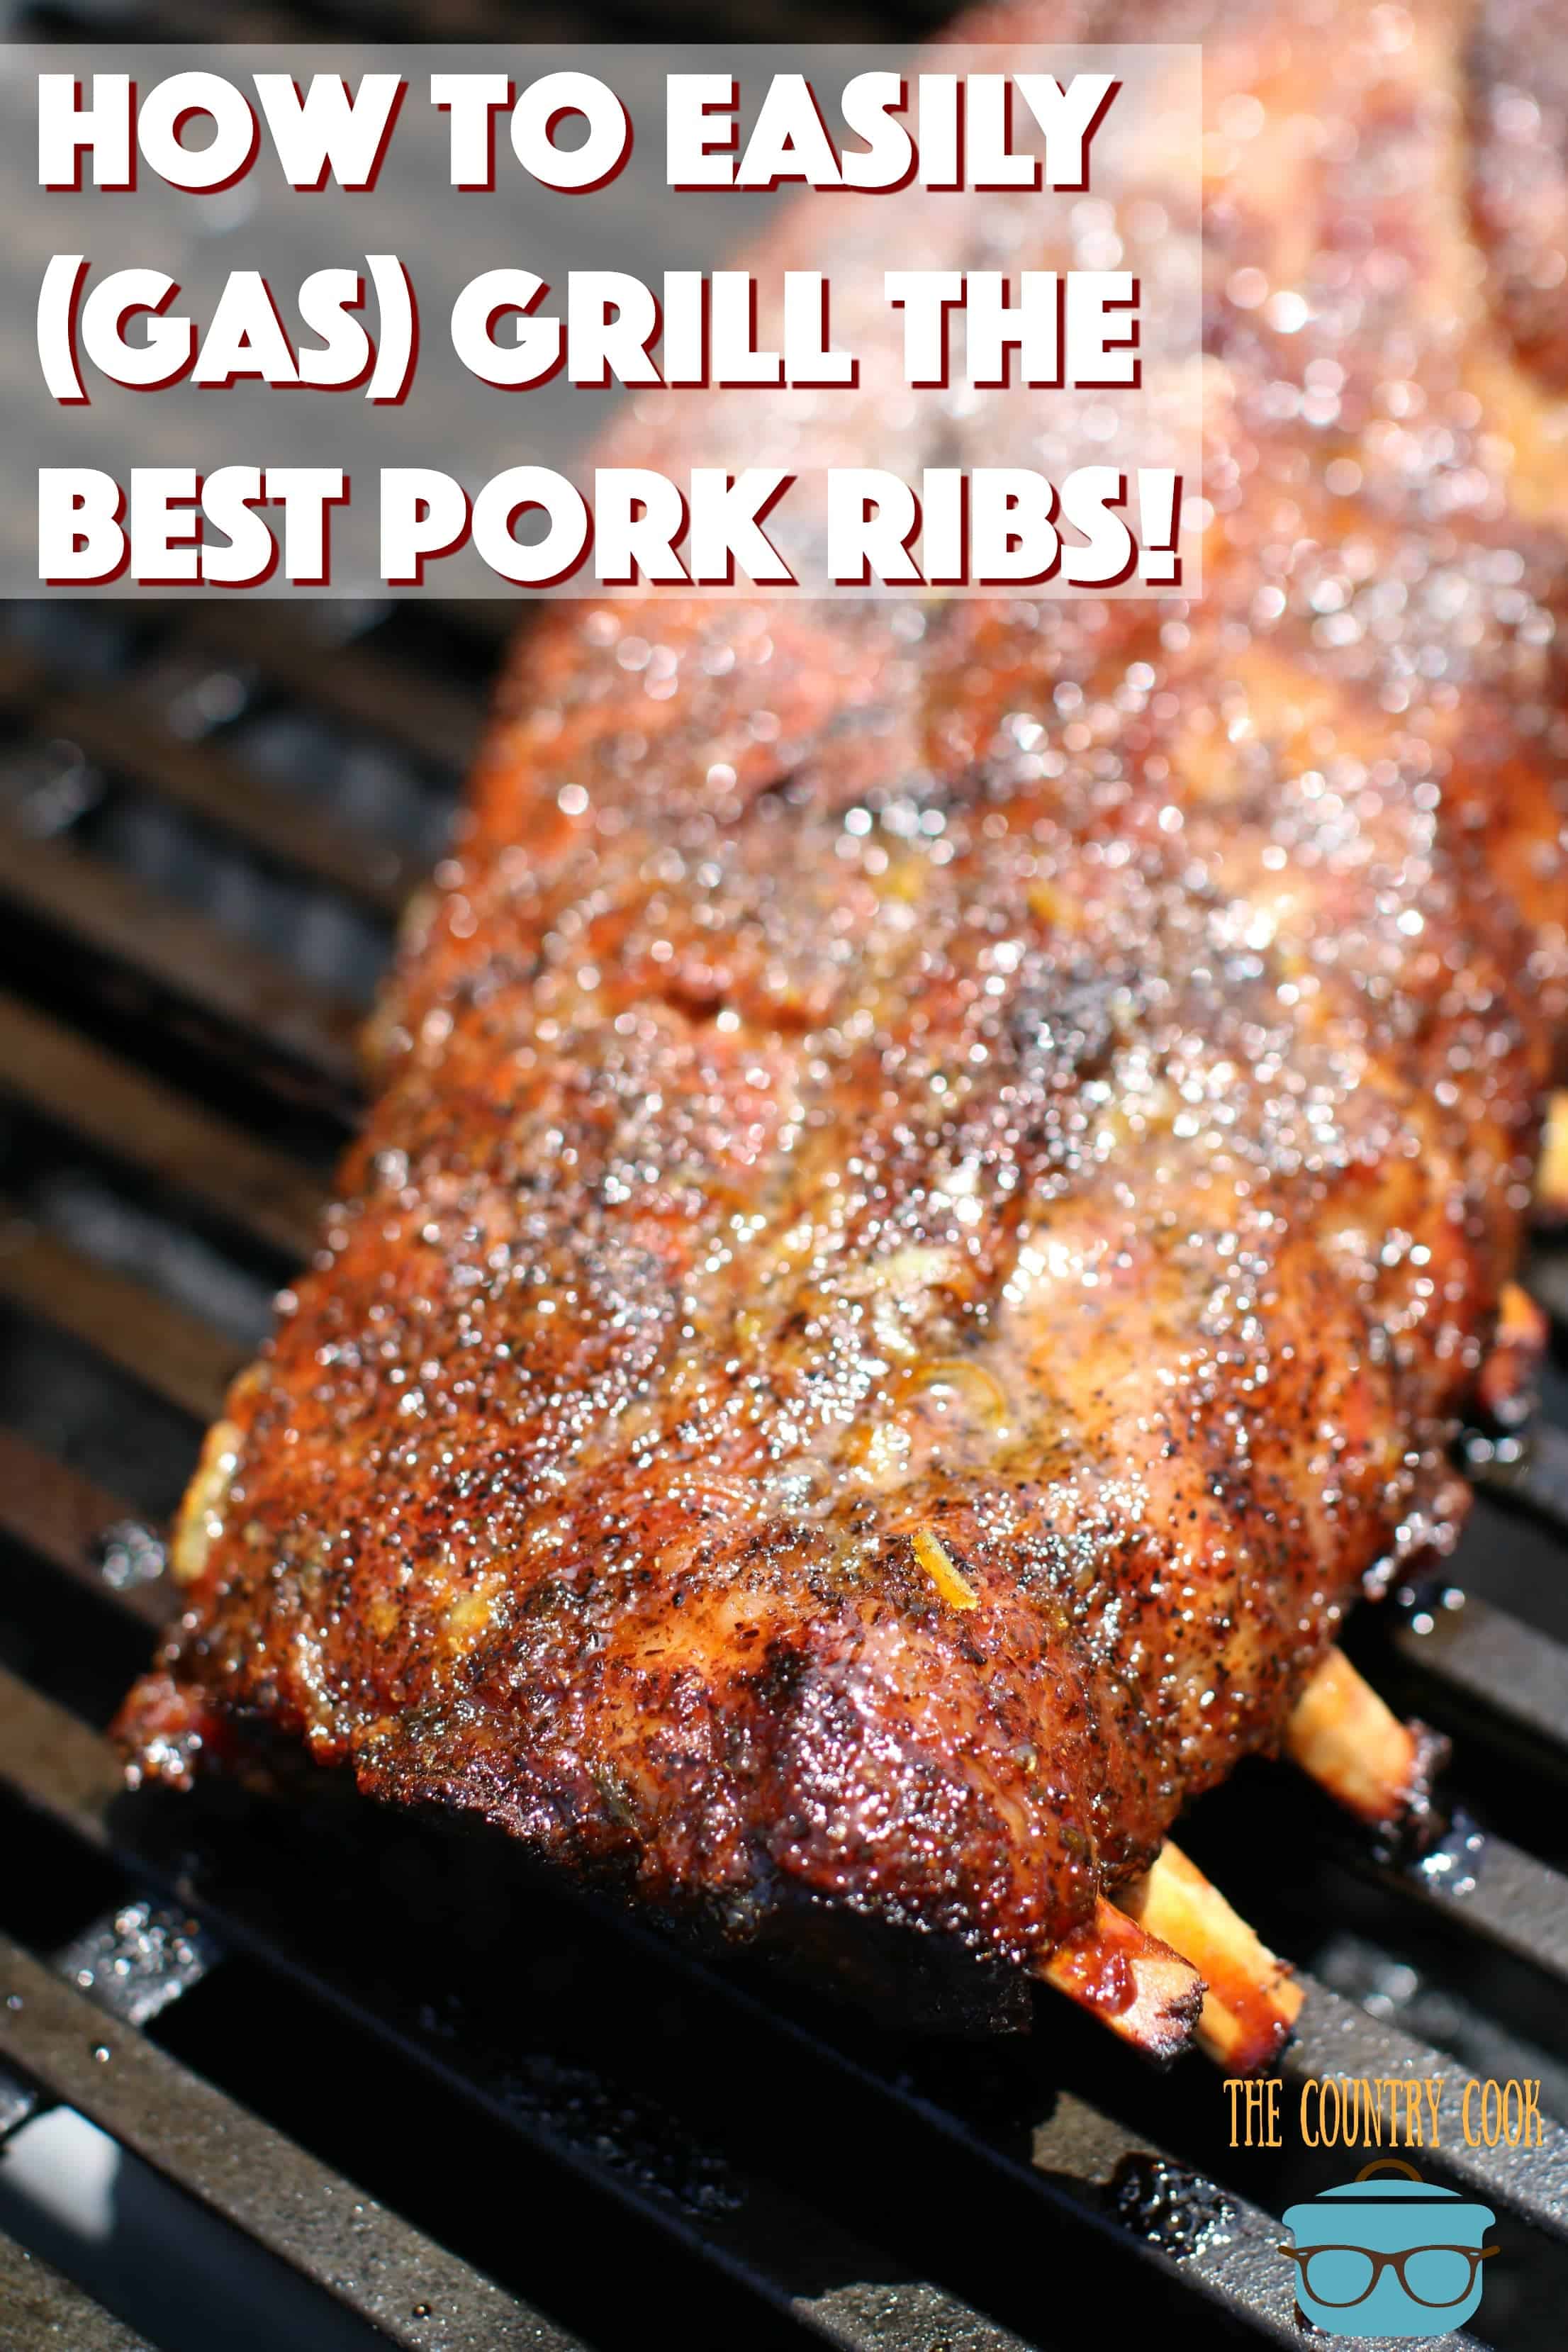 How To Grill The Best Pork Ribs Video The Country Cook